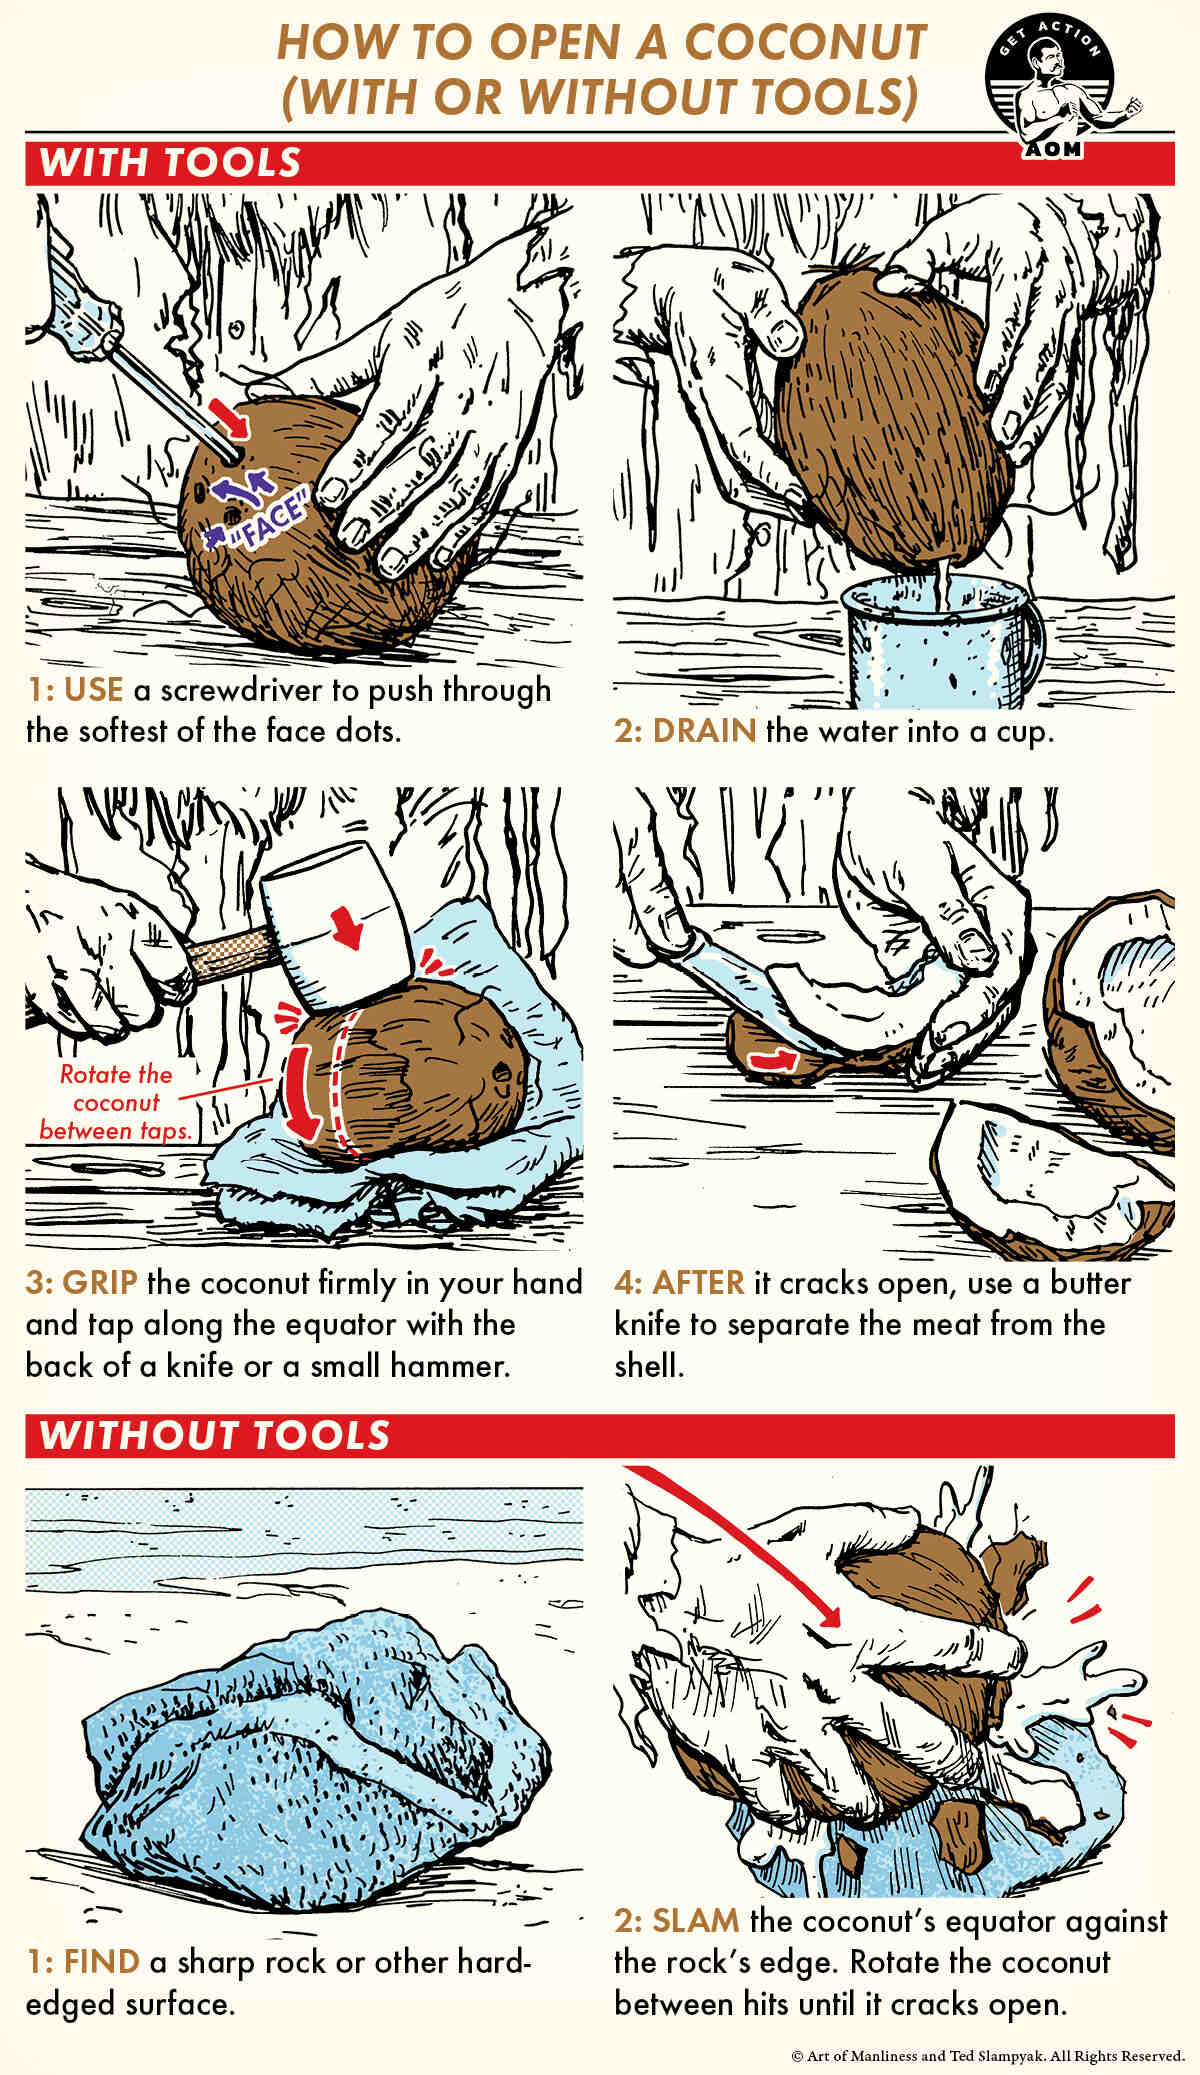 How do you open a coconut without breaking it?